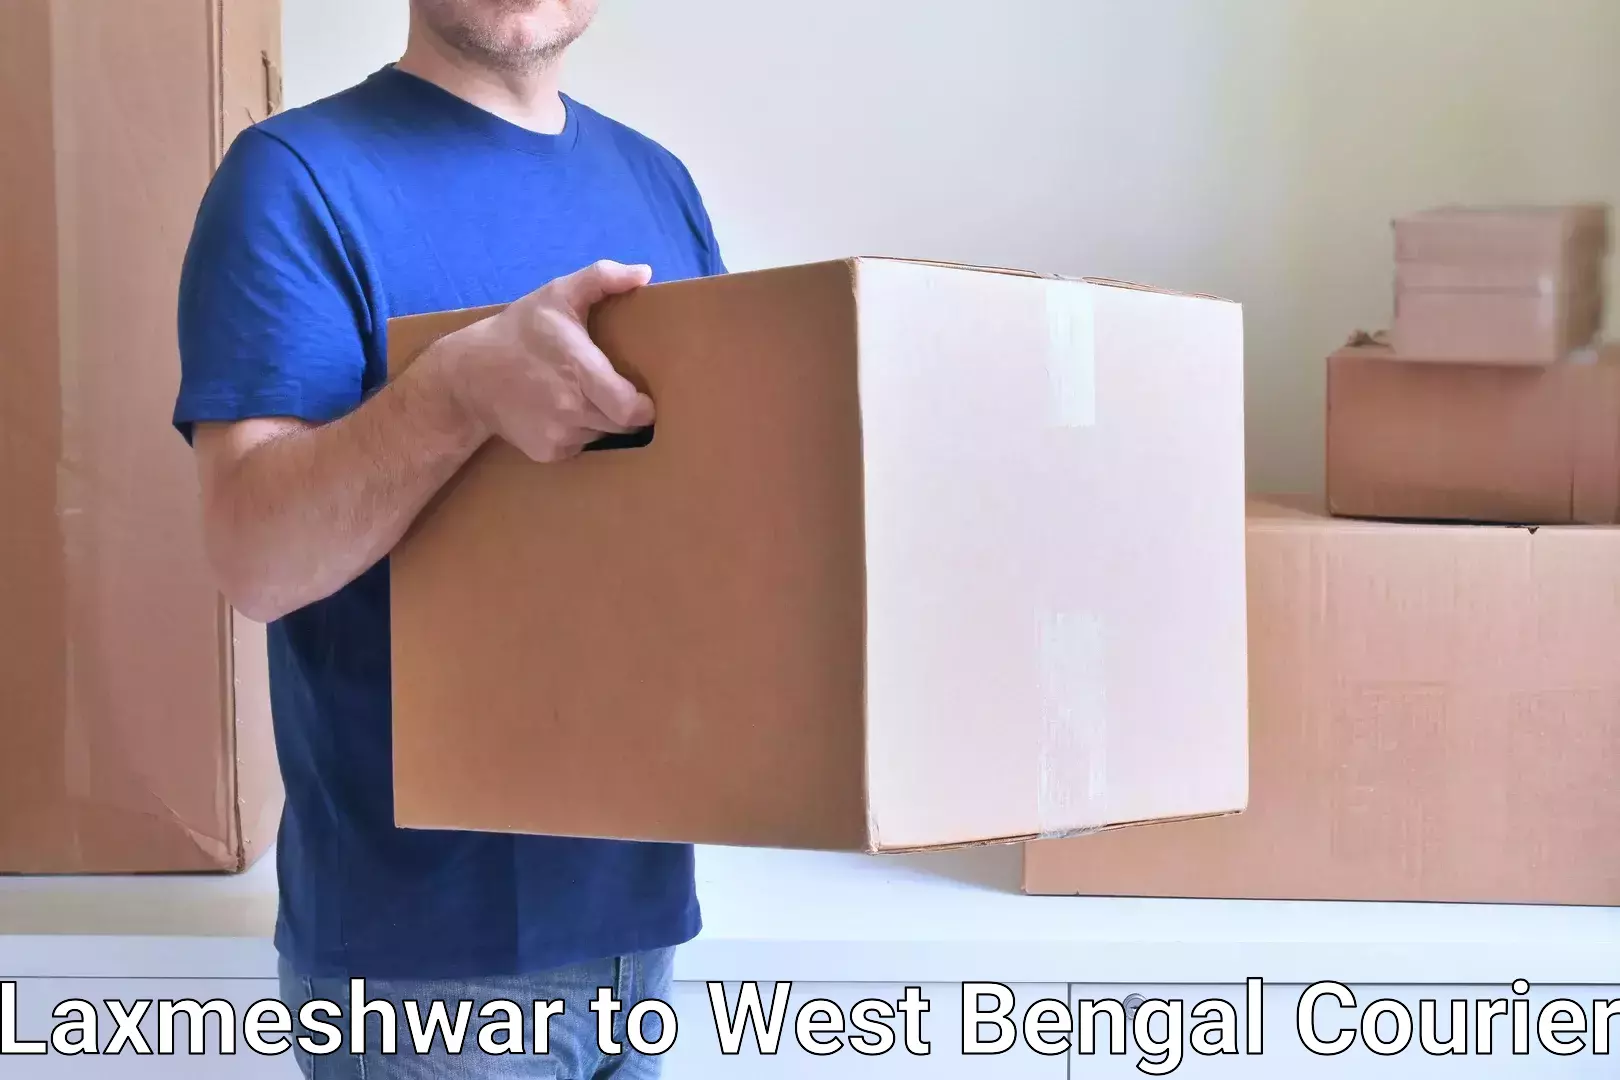 Courier service comparison in Laxmeshwar to Ennore